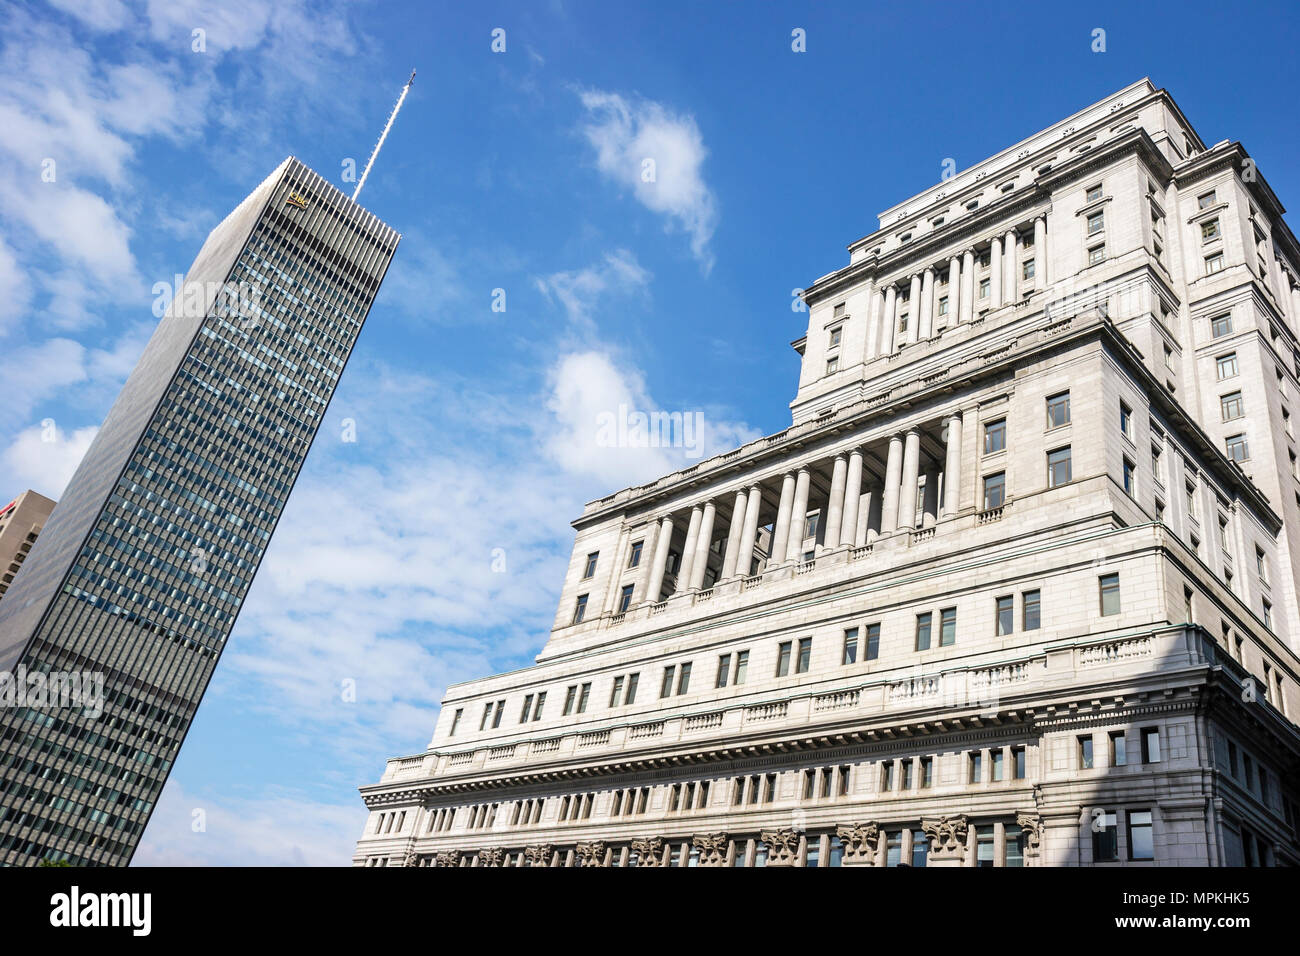 Montreal Canada,Quebec Province,Place Ville Marie,CIBC building,Sun Life Financial,headquarters,bank,banking,insurance,Canada070706002 Stock Photo